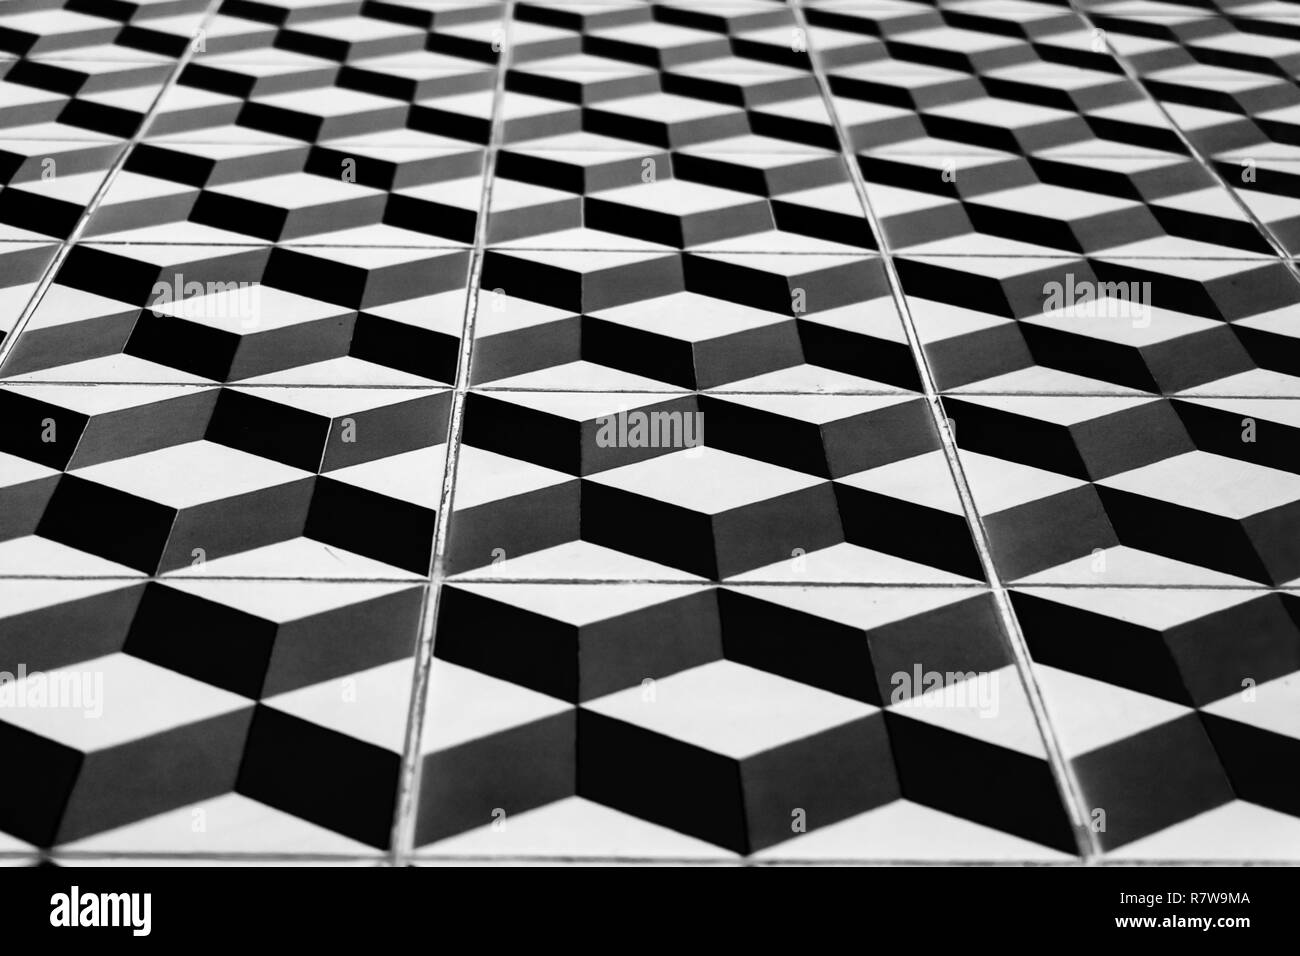 Perspective view of the floor of retro tiles. Repeating geometric patterns of dice on the floor of ceramic tile. Stock Photo